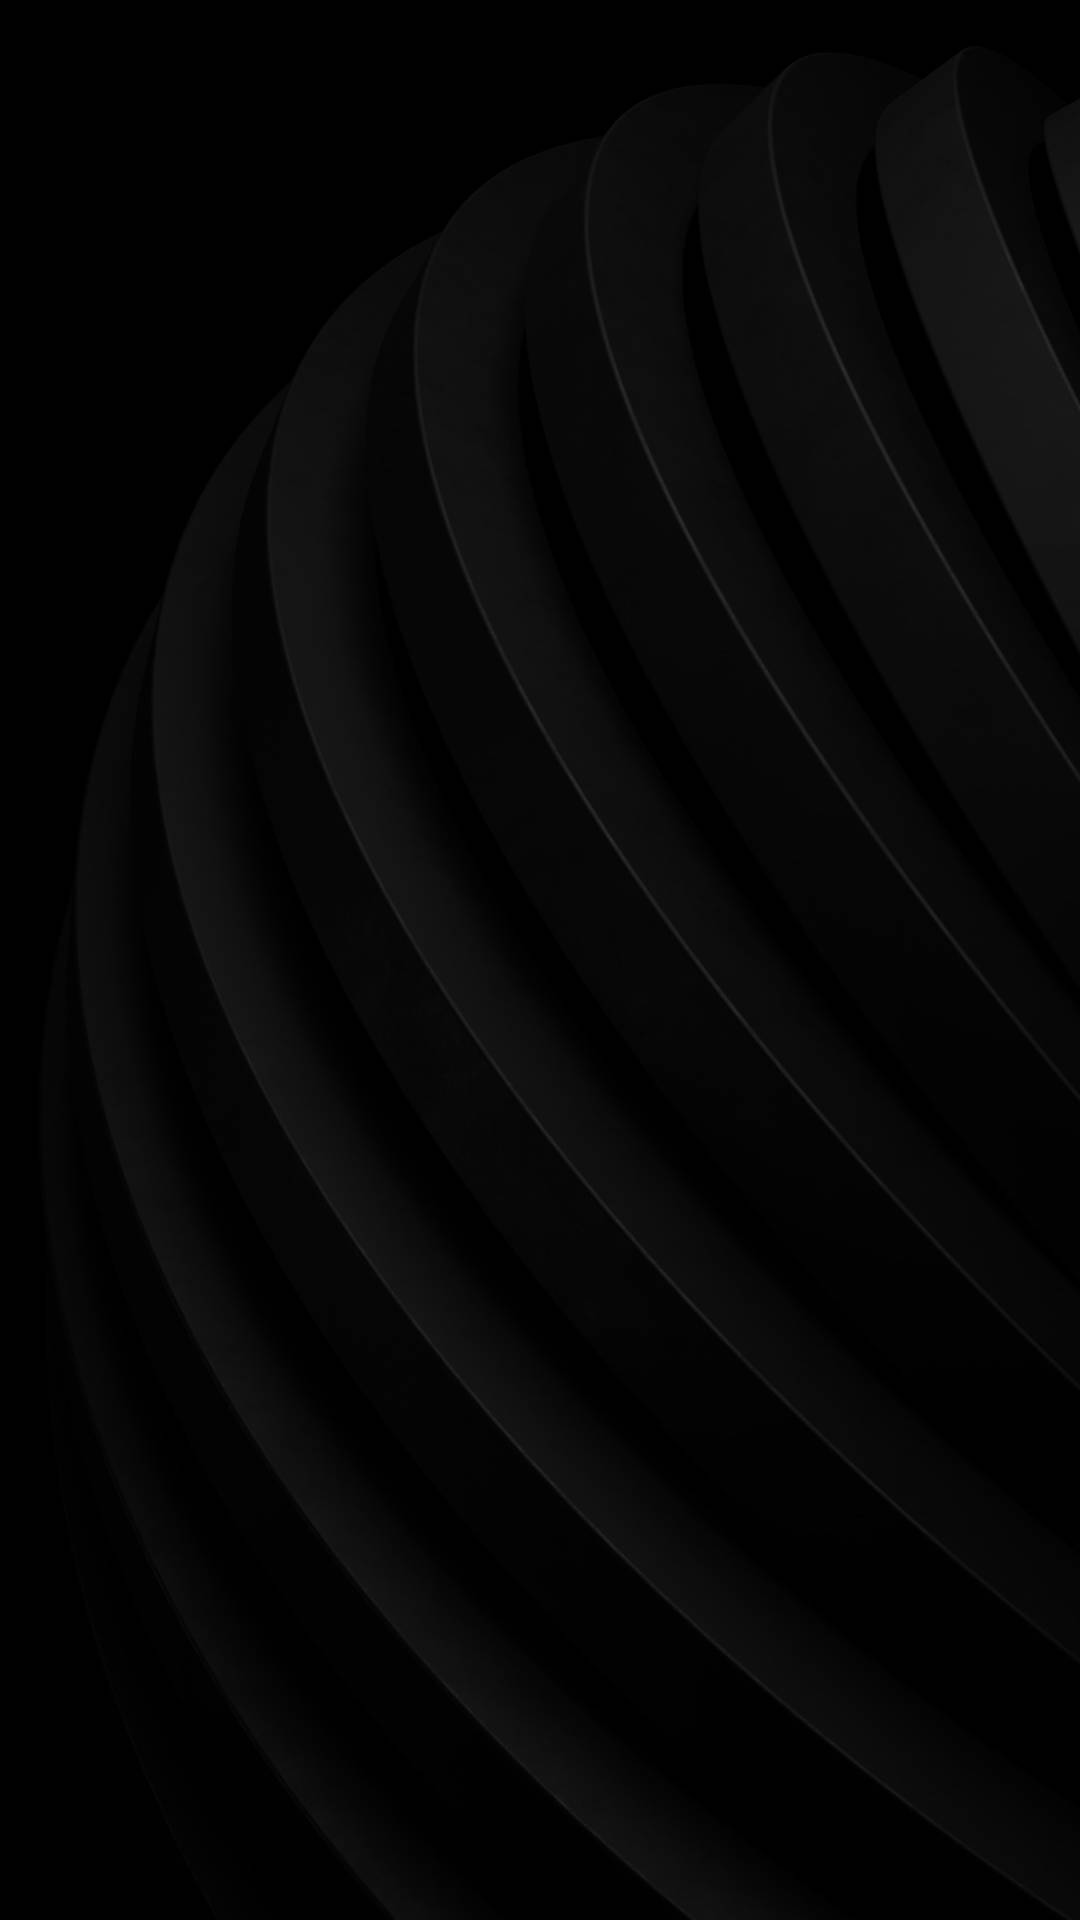 Abstract Curved Black Aesthetic Tumblr Iphone Background